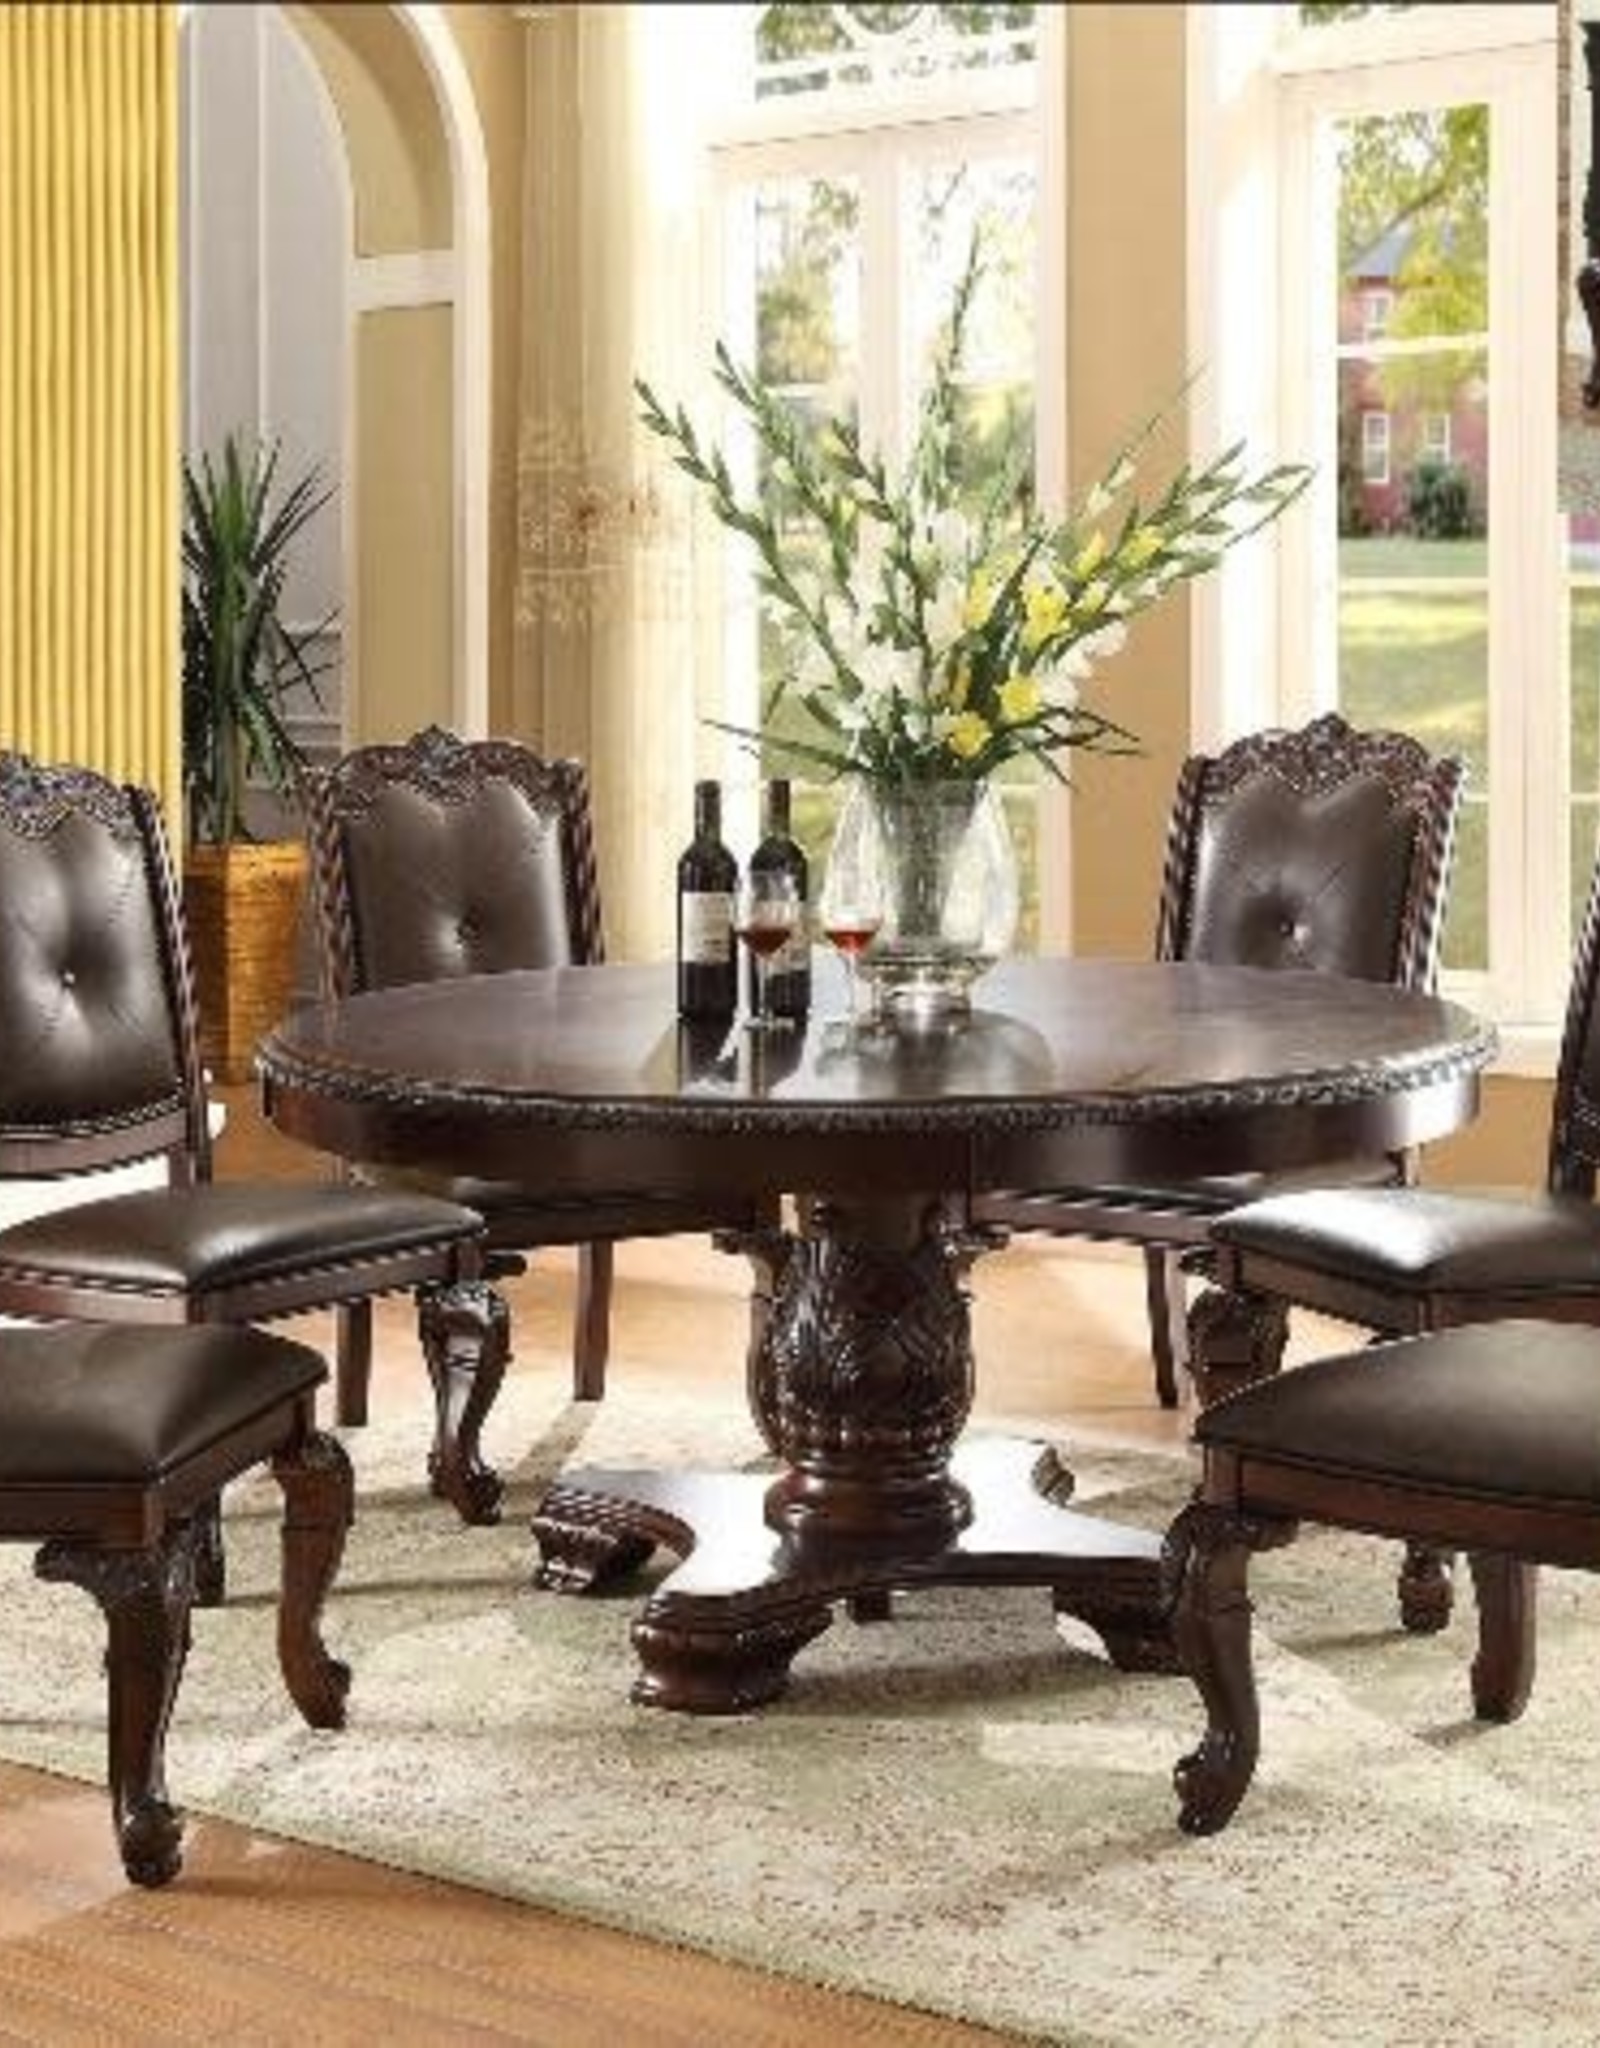 Crownmark Kiera Dining Chair w/ Faux Leather Seats